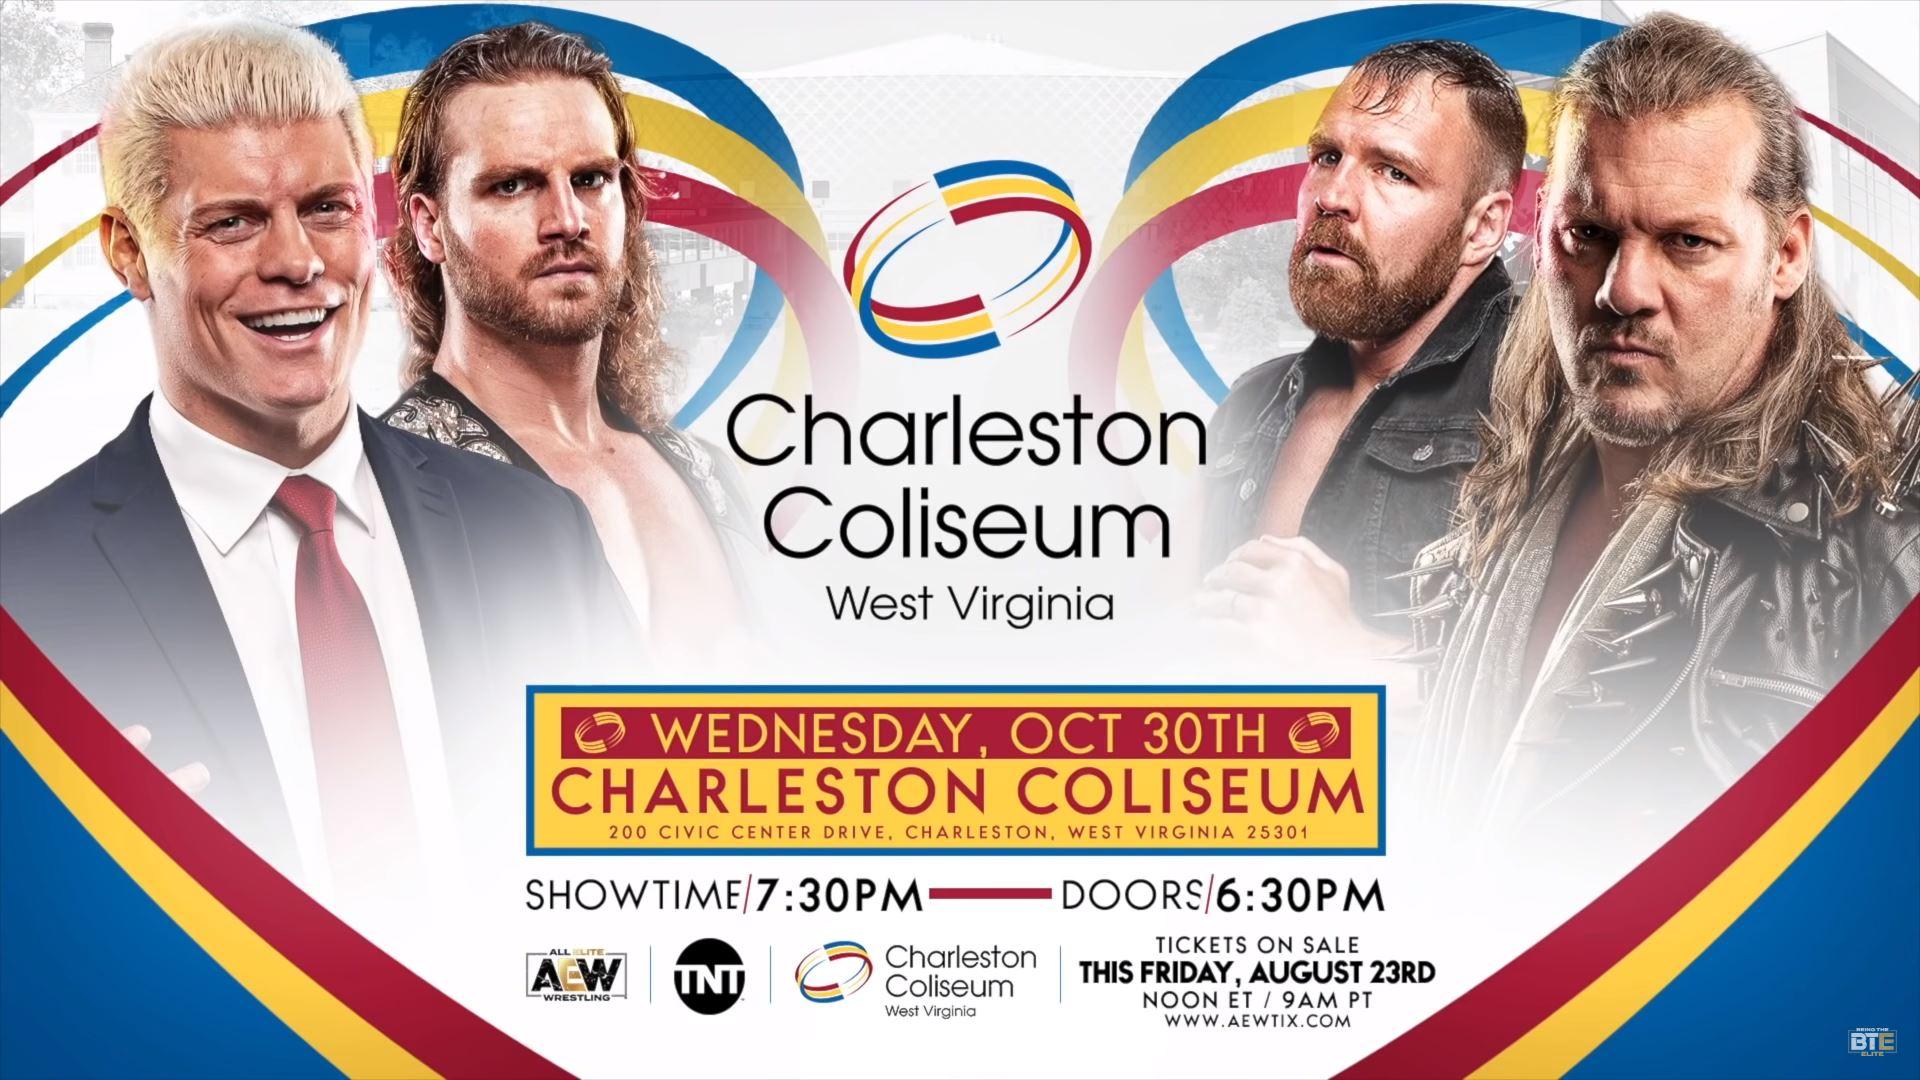 All Elite Wrestling to tape television show live